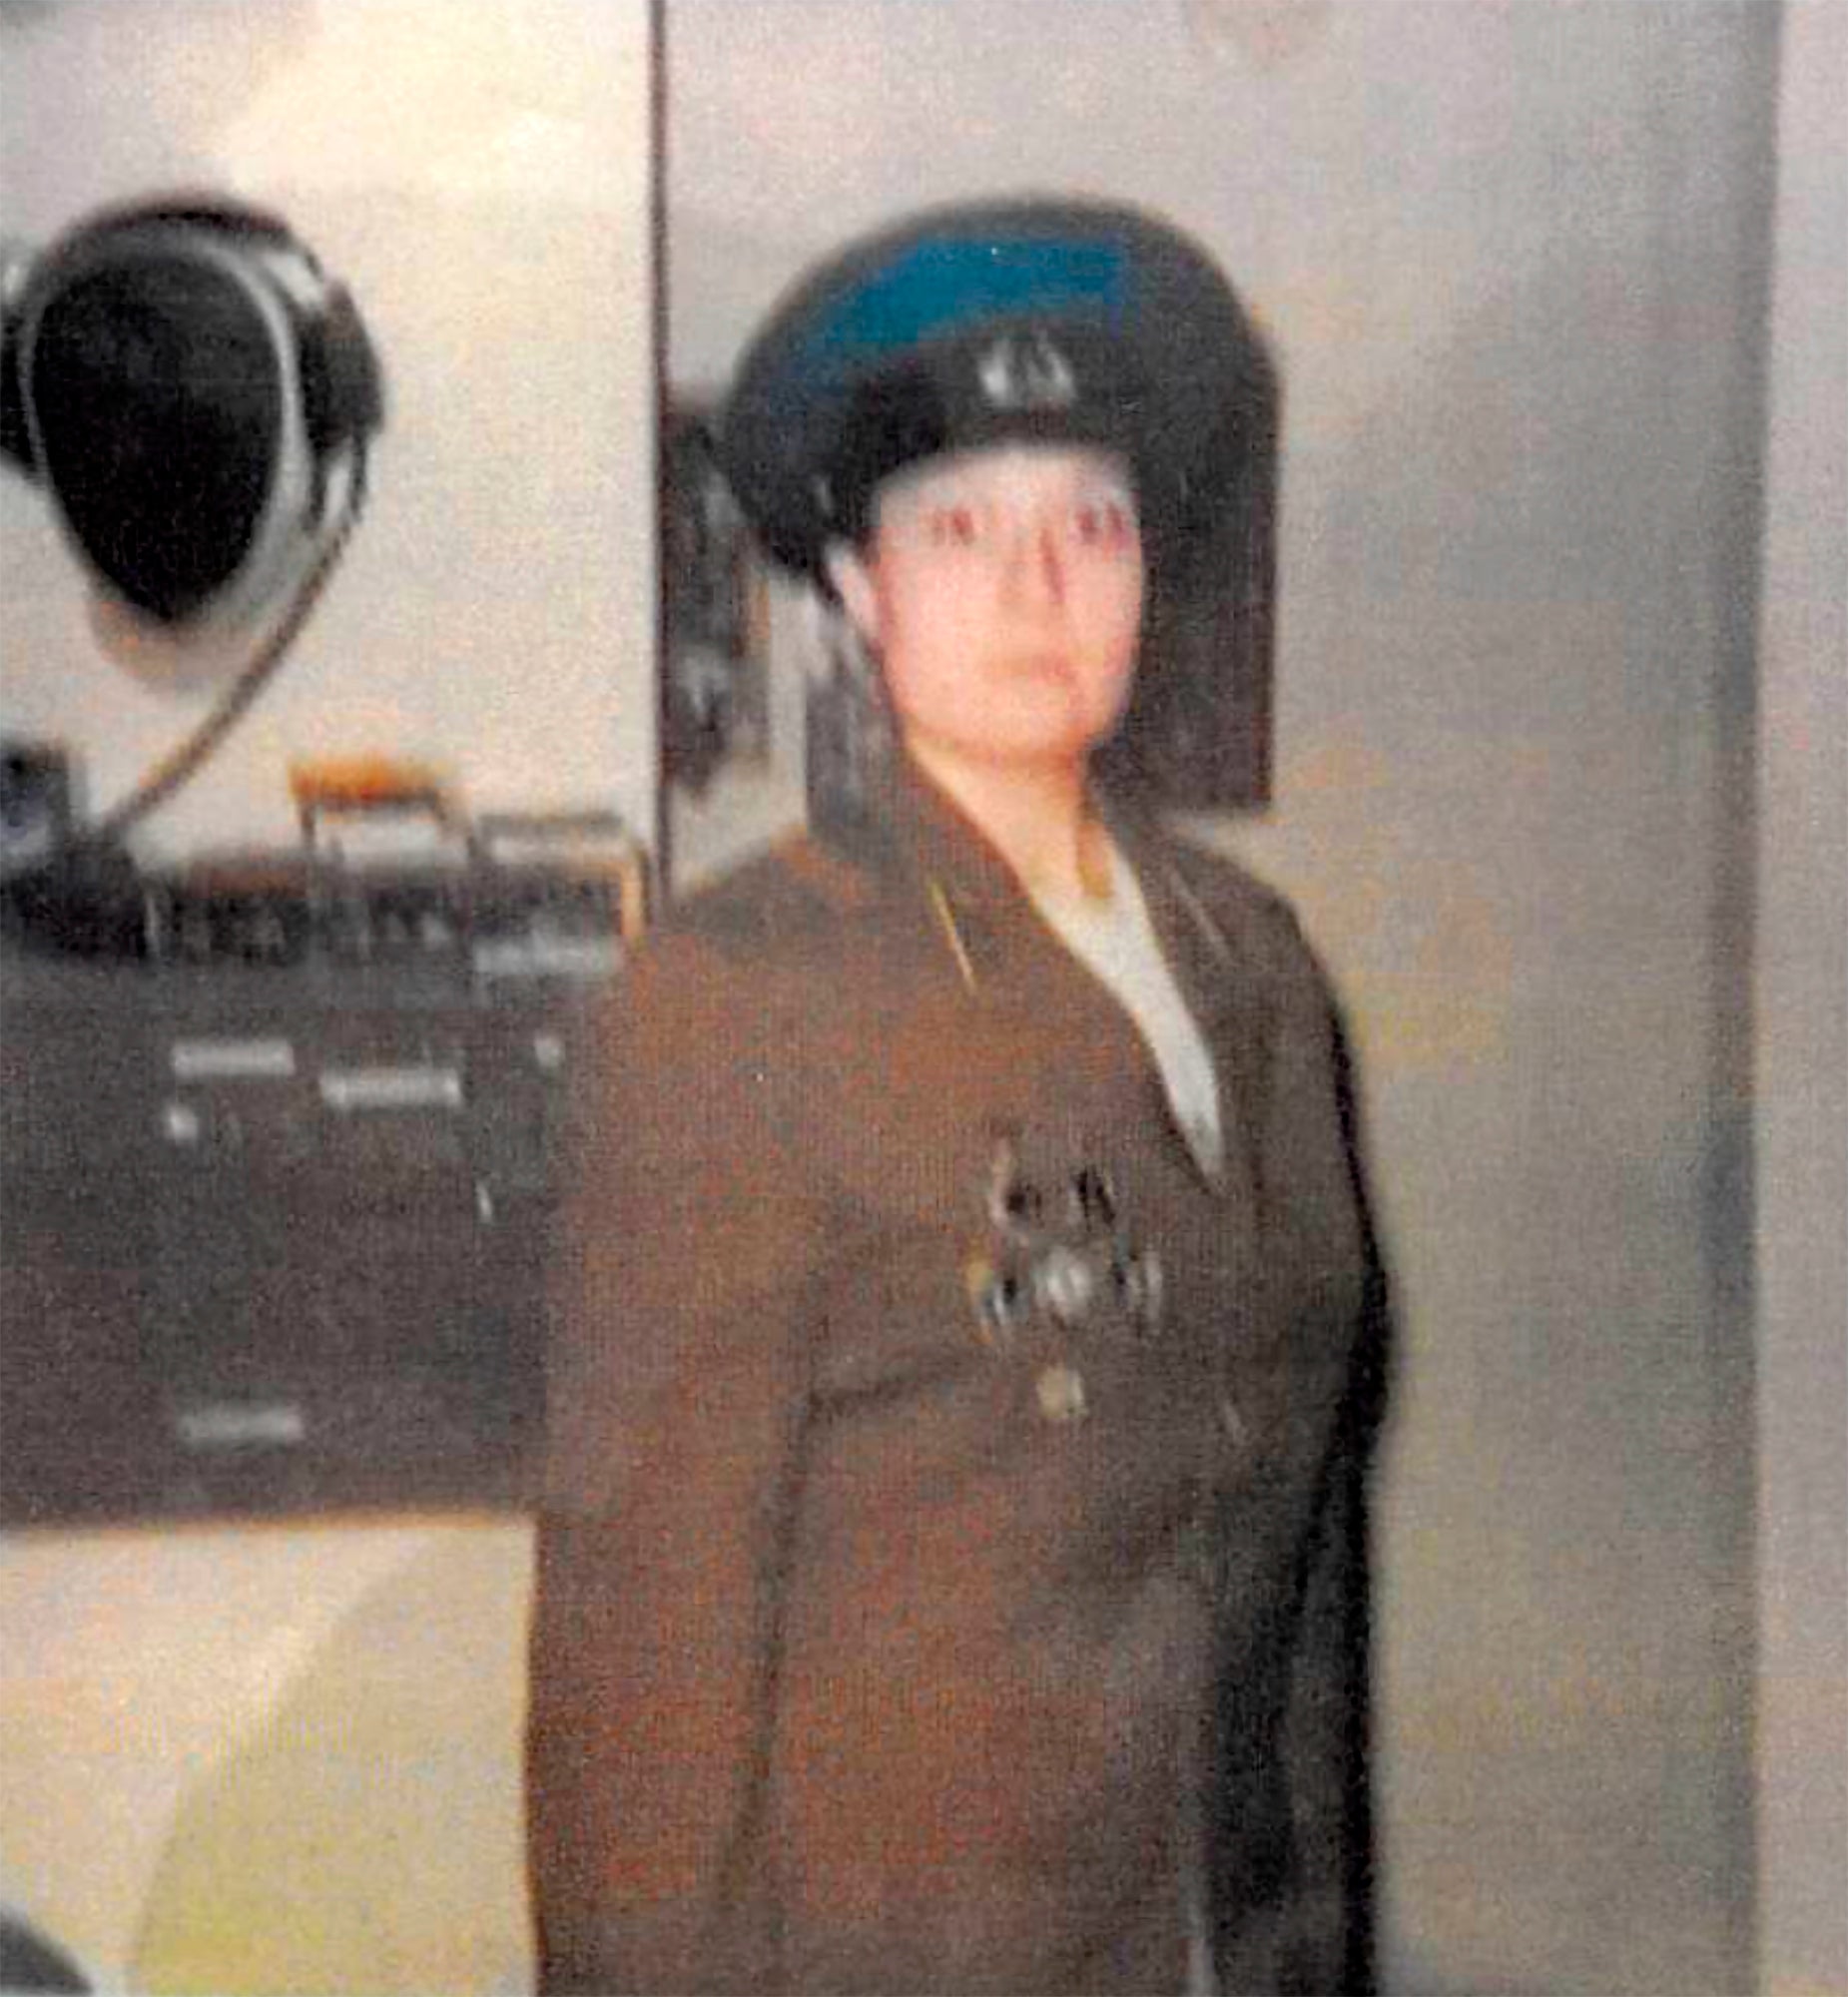 This undated photo provided by the United States District Court District of Hawaii, shows Gwynn Darle Morrison, also known as Julie Lyn Montague, purportedly in a KGB, the former Russian spy agency uniform